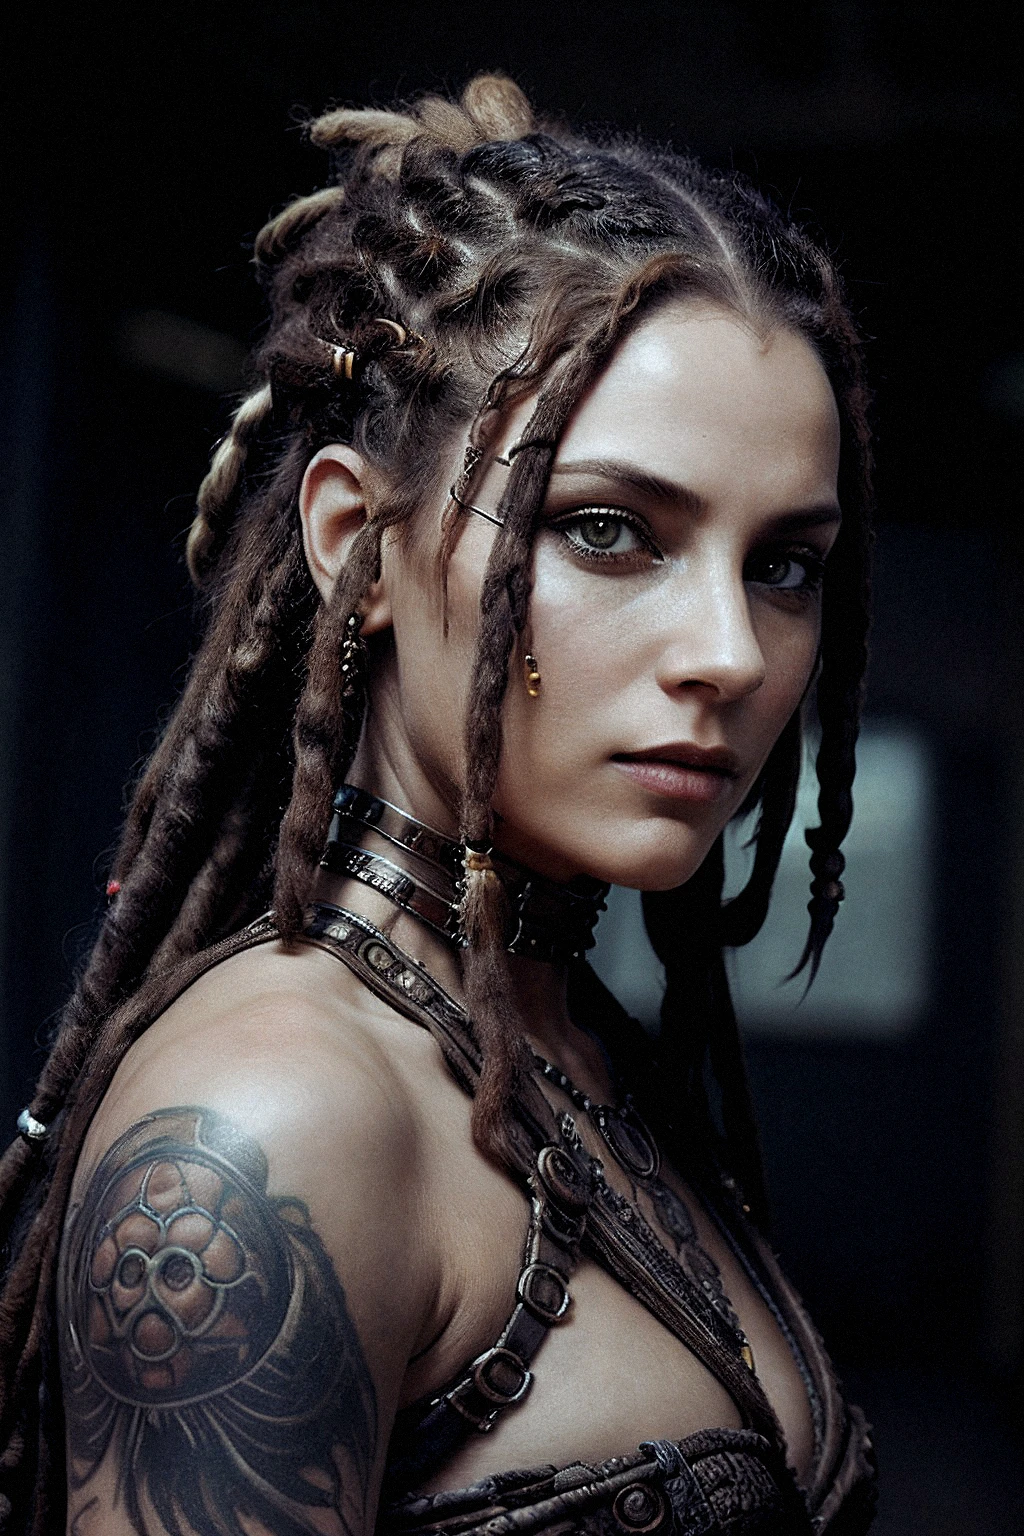 ASCIIa woman with dread locks and makeup looks into the camera with a creepy look on her face and eyes, Android Jones, biopunk, concept art, video art, matrix color grading, tattoos in her face, scify,  steampunk_costume,  steampunkai